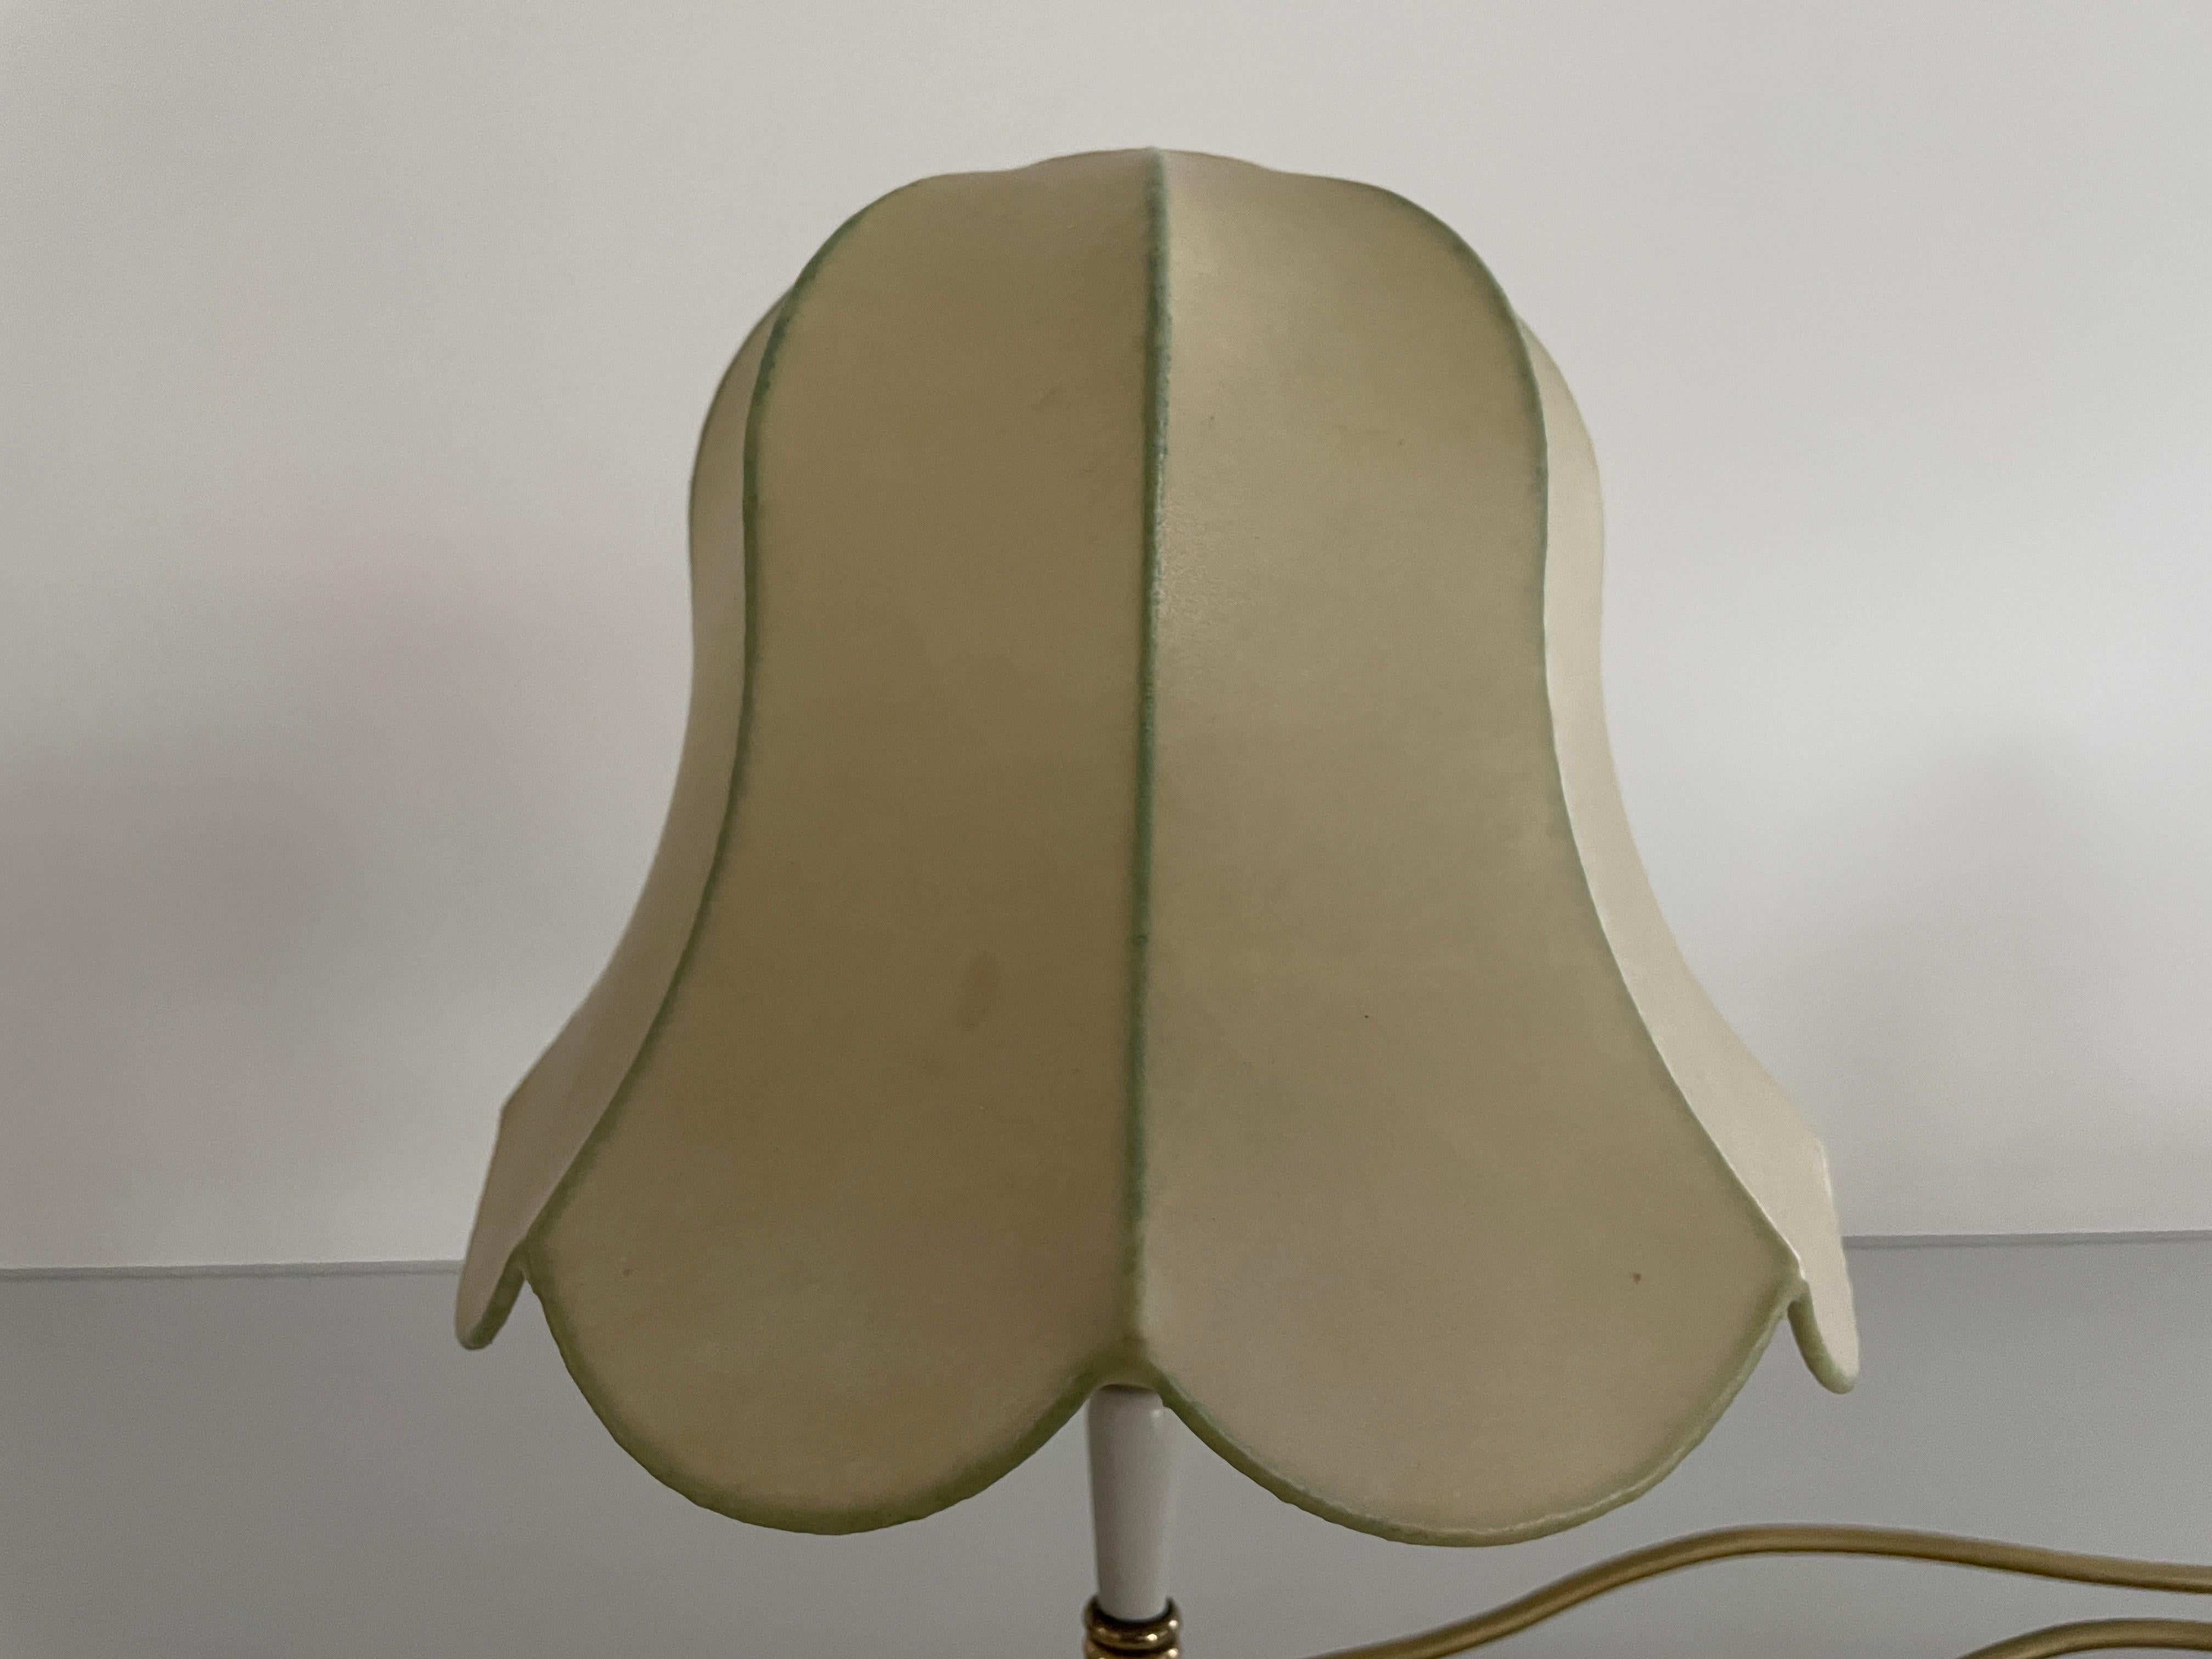 Cocoon Shade Metal Body Pair of Bedside Lamps by GOLDKANT, 1970s, Germany For Sale 2